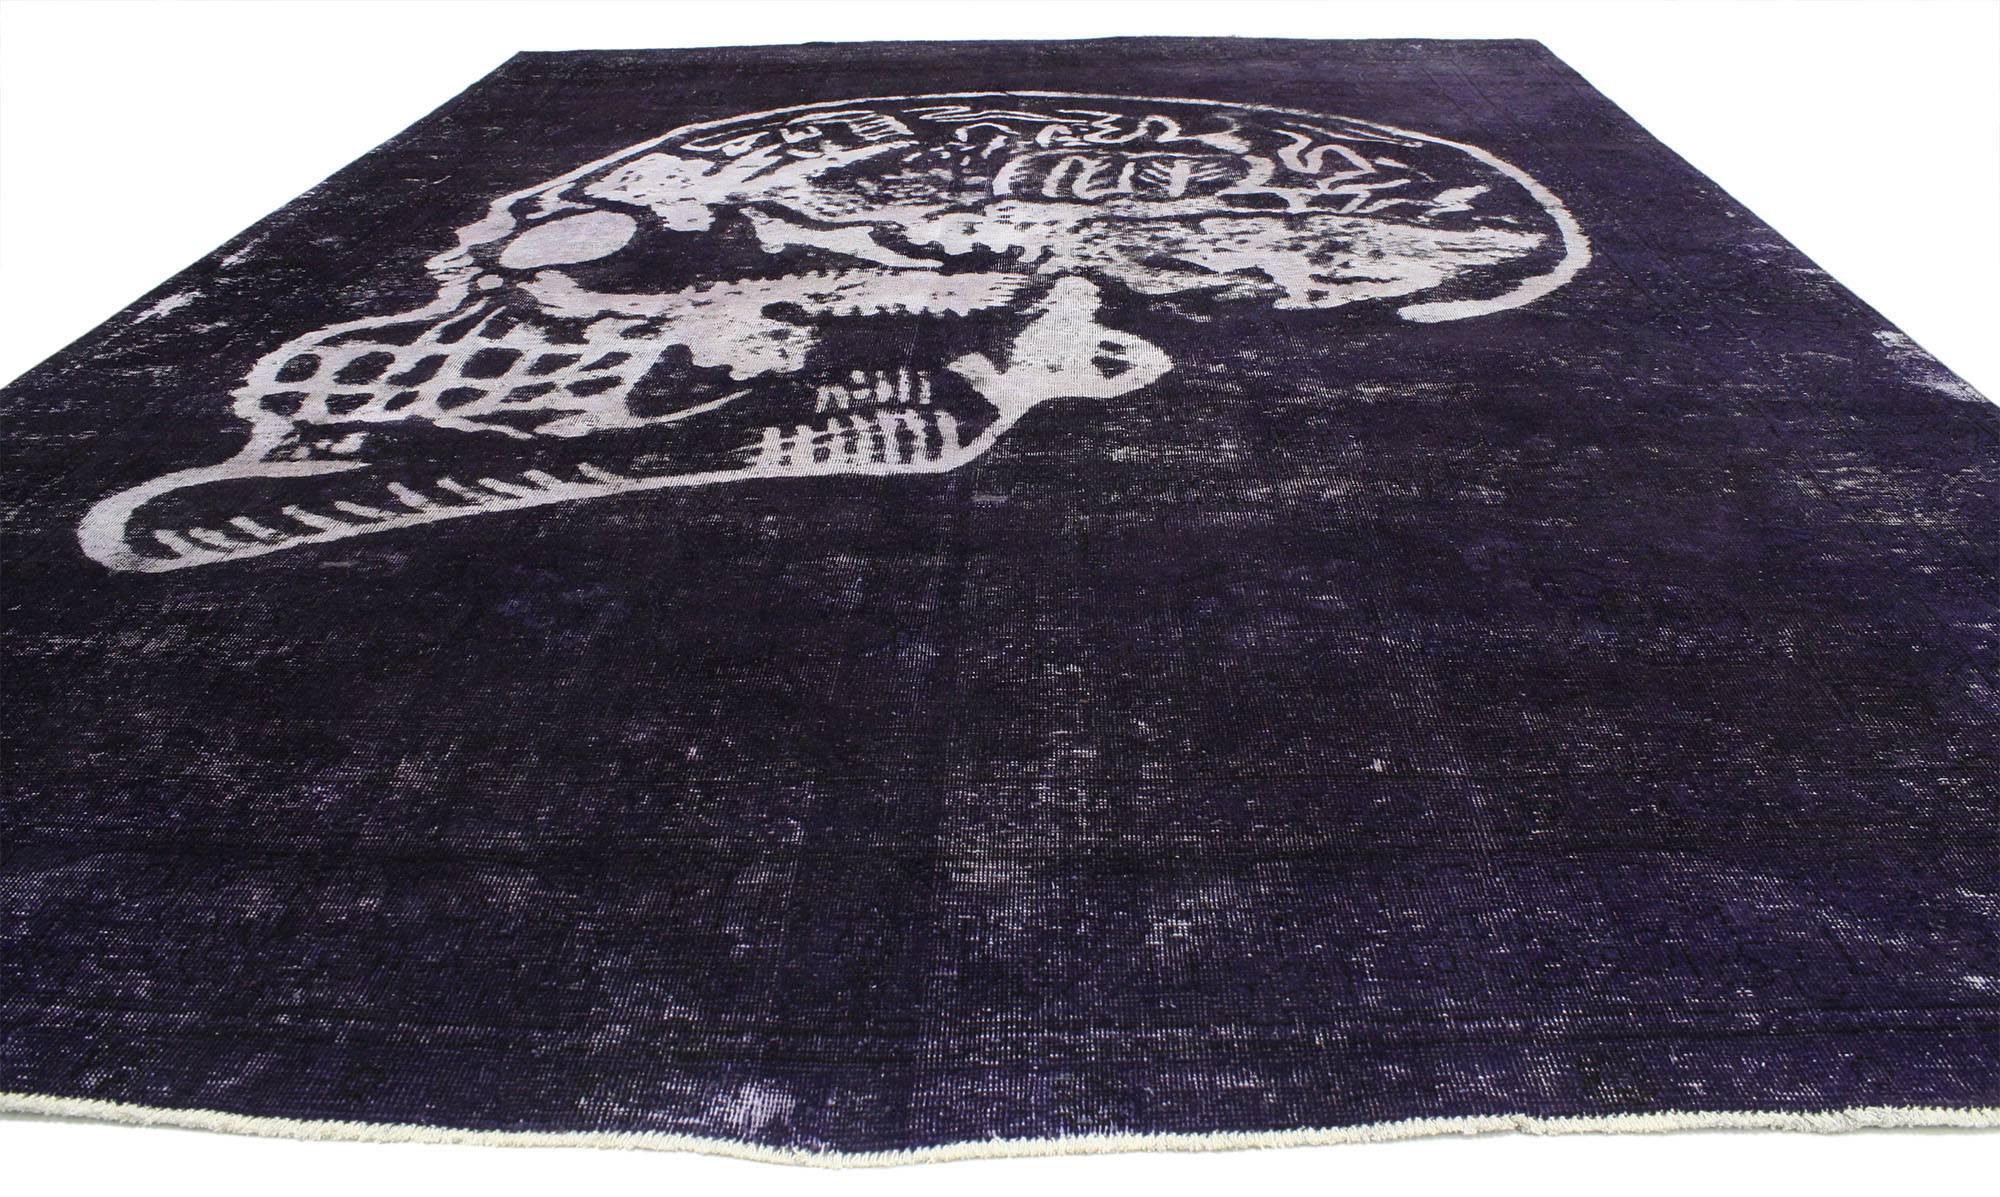 80430, distressed vintage Craniotomy purple skull area rug inspired by Alexander McQueen. This distressed vintage Persian rug makes a statement with its saturated violet-purple color scheme and graphic skull design. The hand knotted wool skull rug